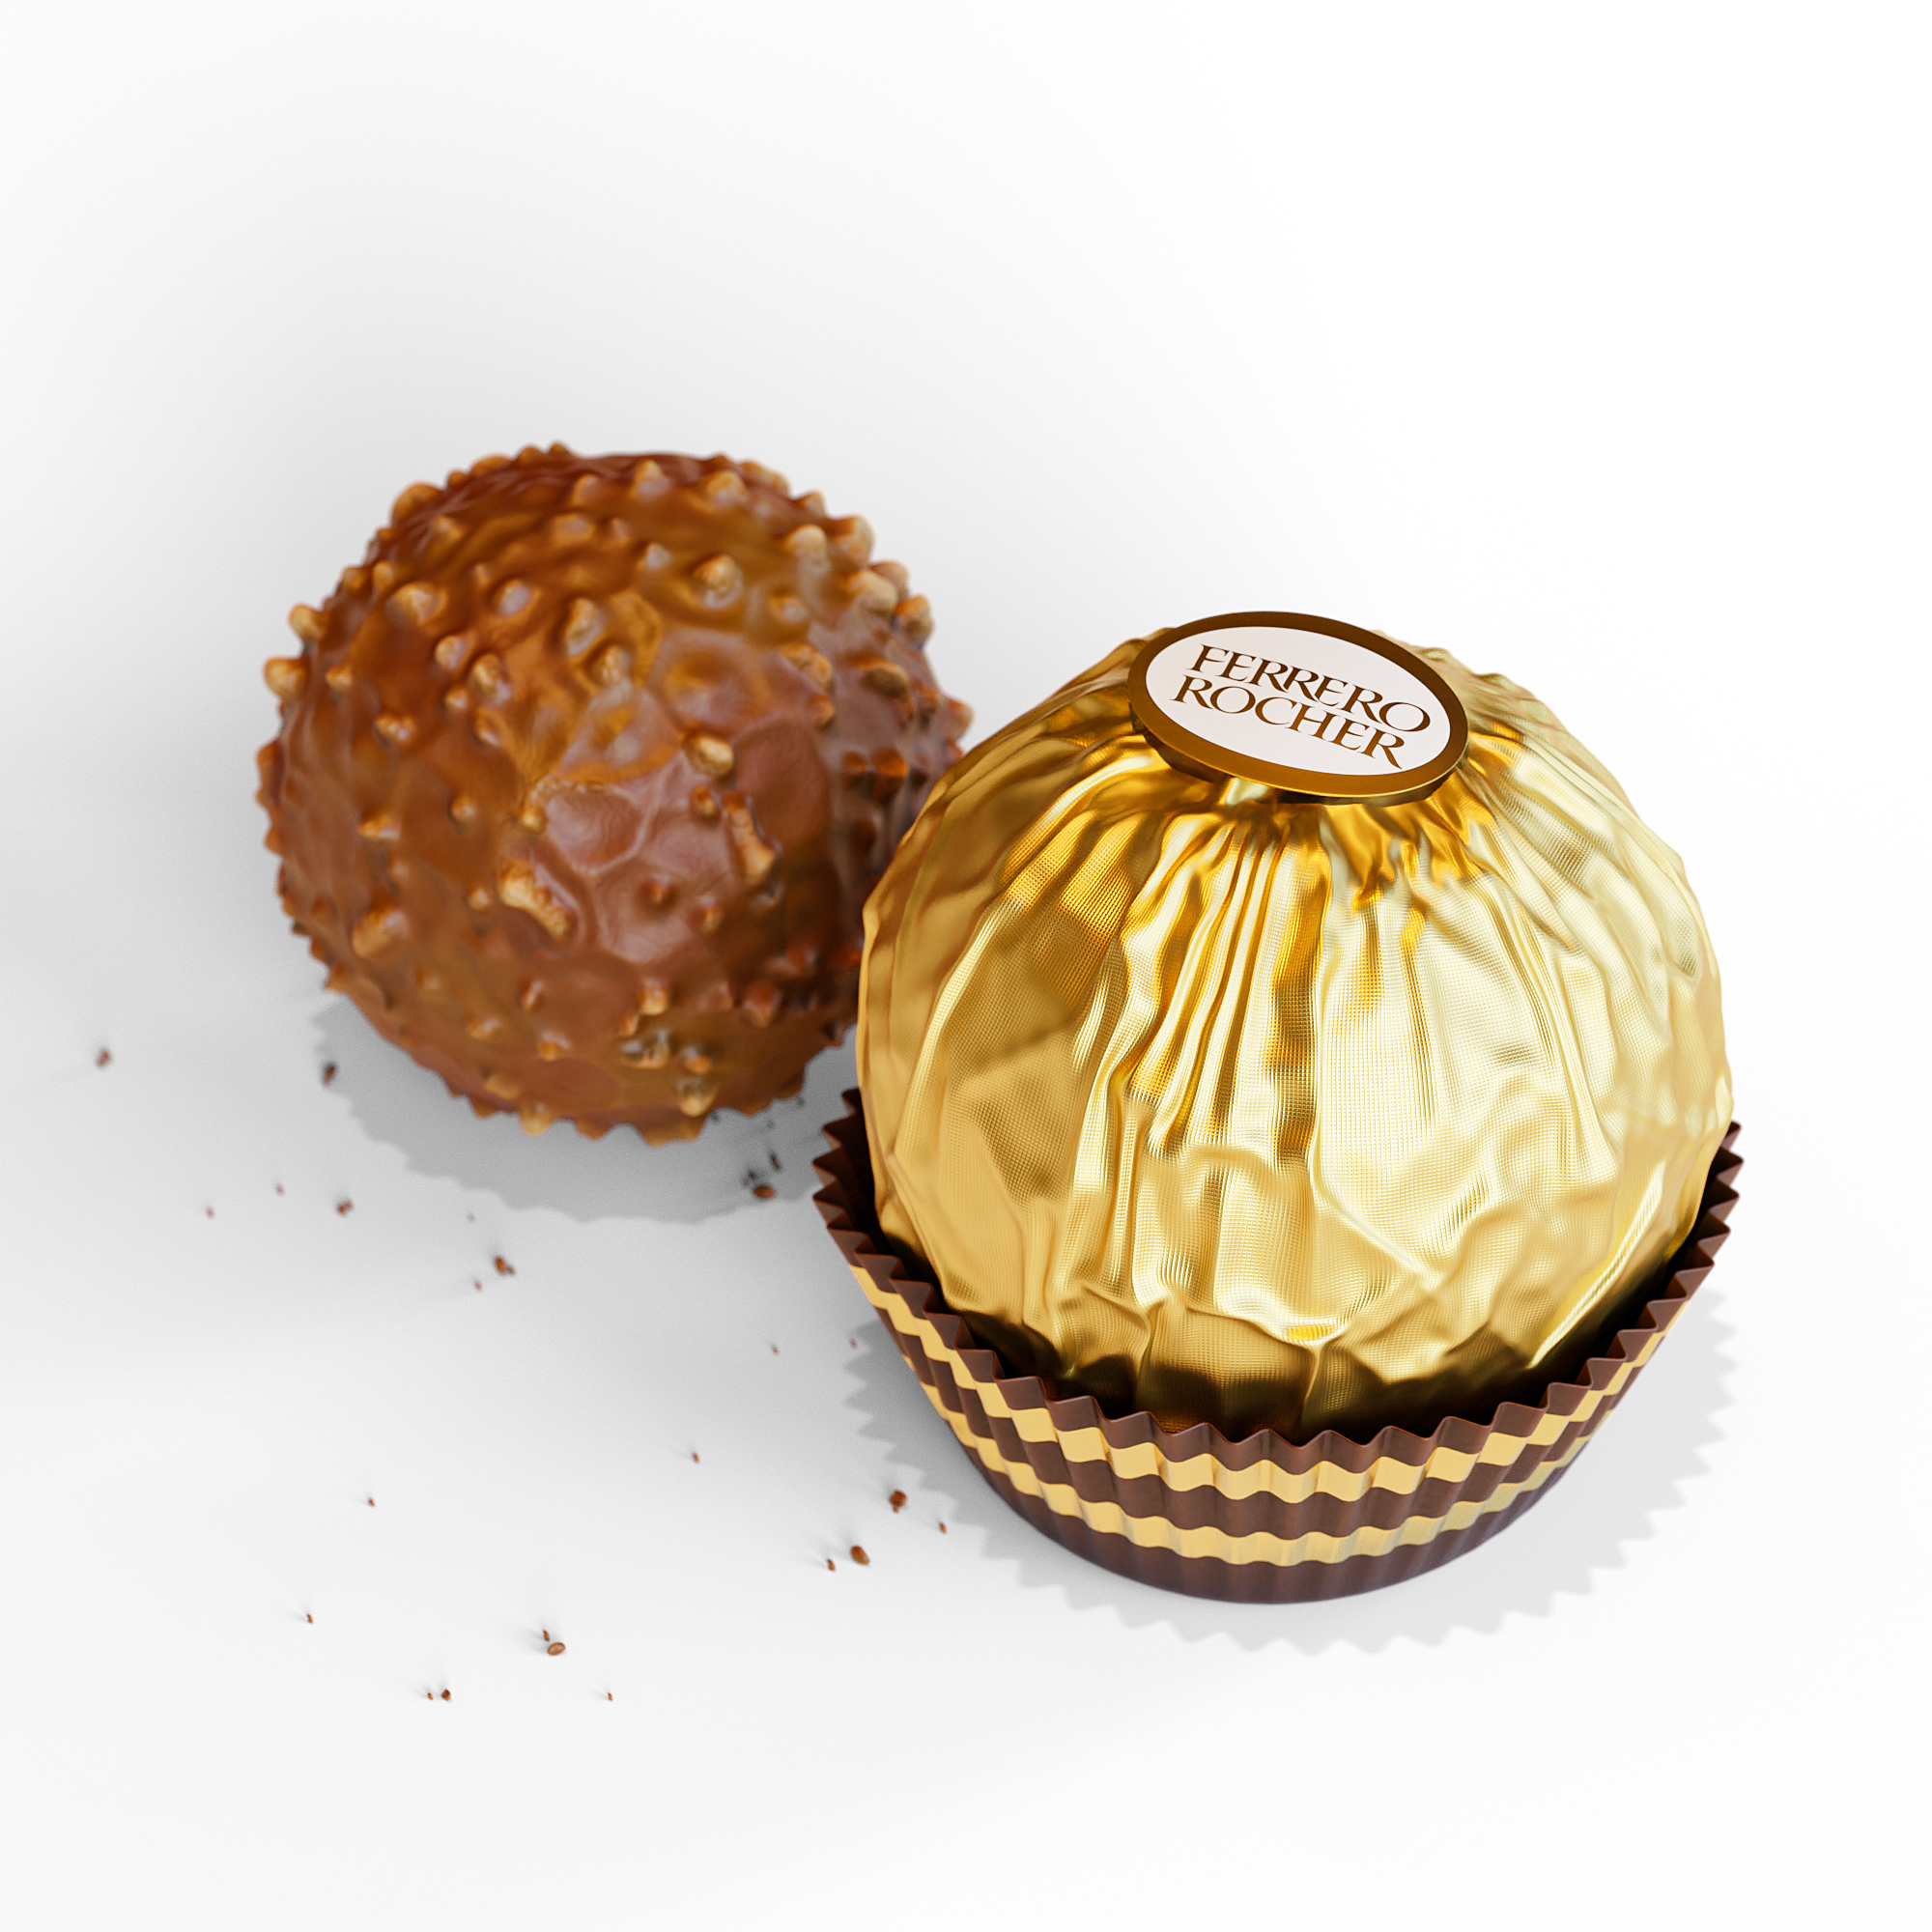 Ferrero Rocher chocolates - Finished Projects - Blender Artists Community